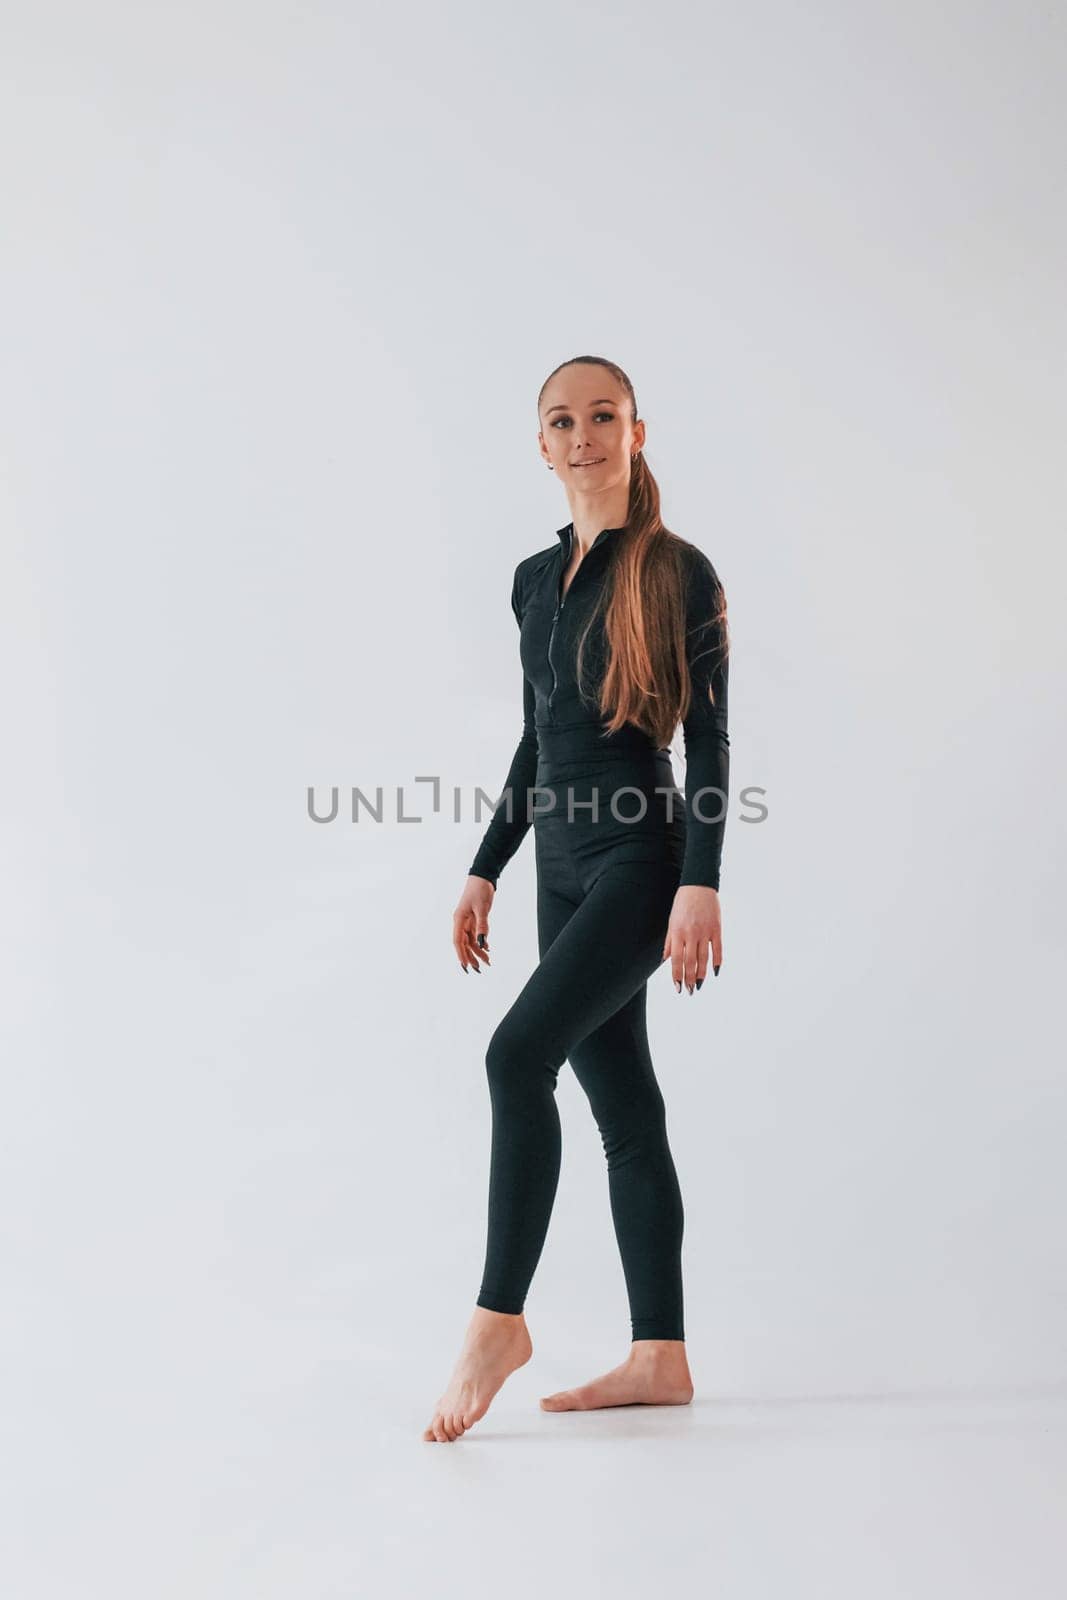 Against white background. Young woman in sportive clothes doing gymnastics indoors.